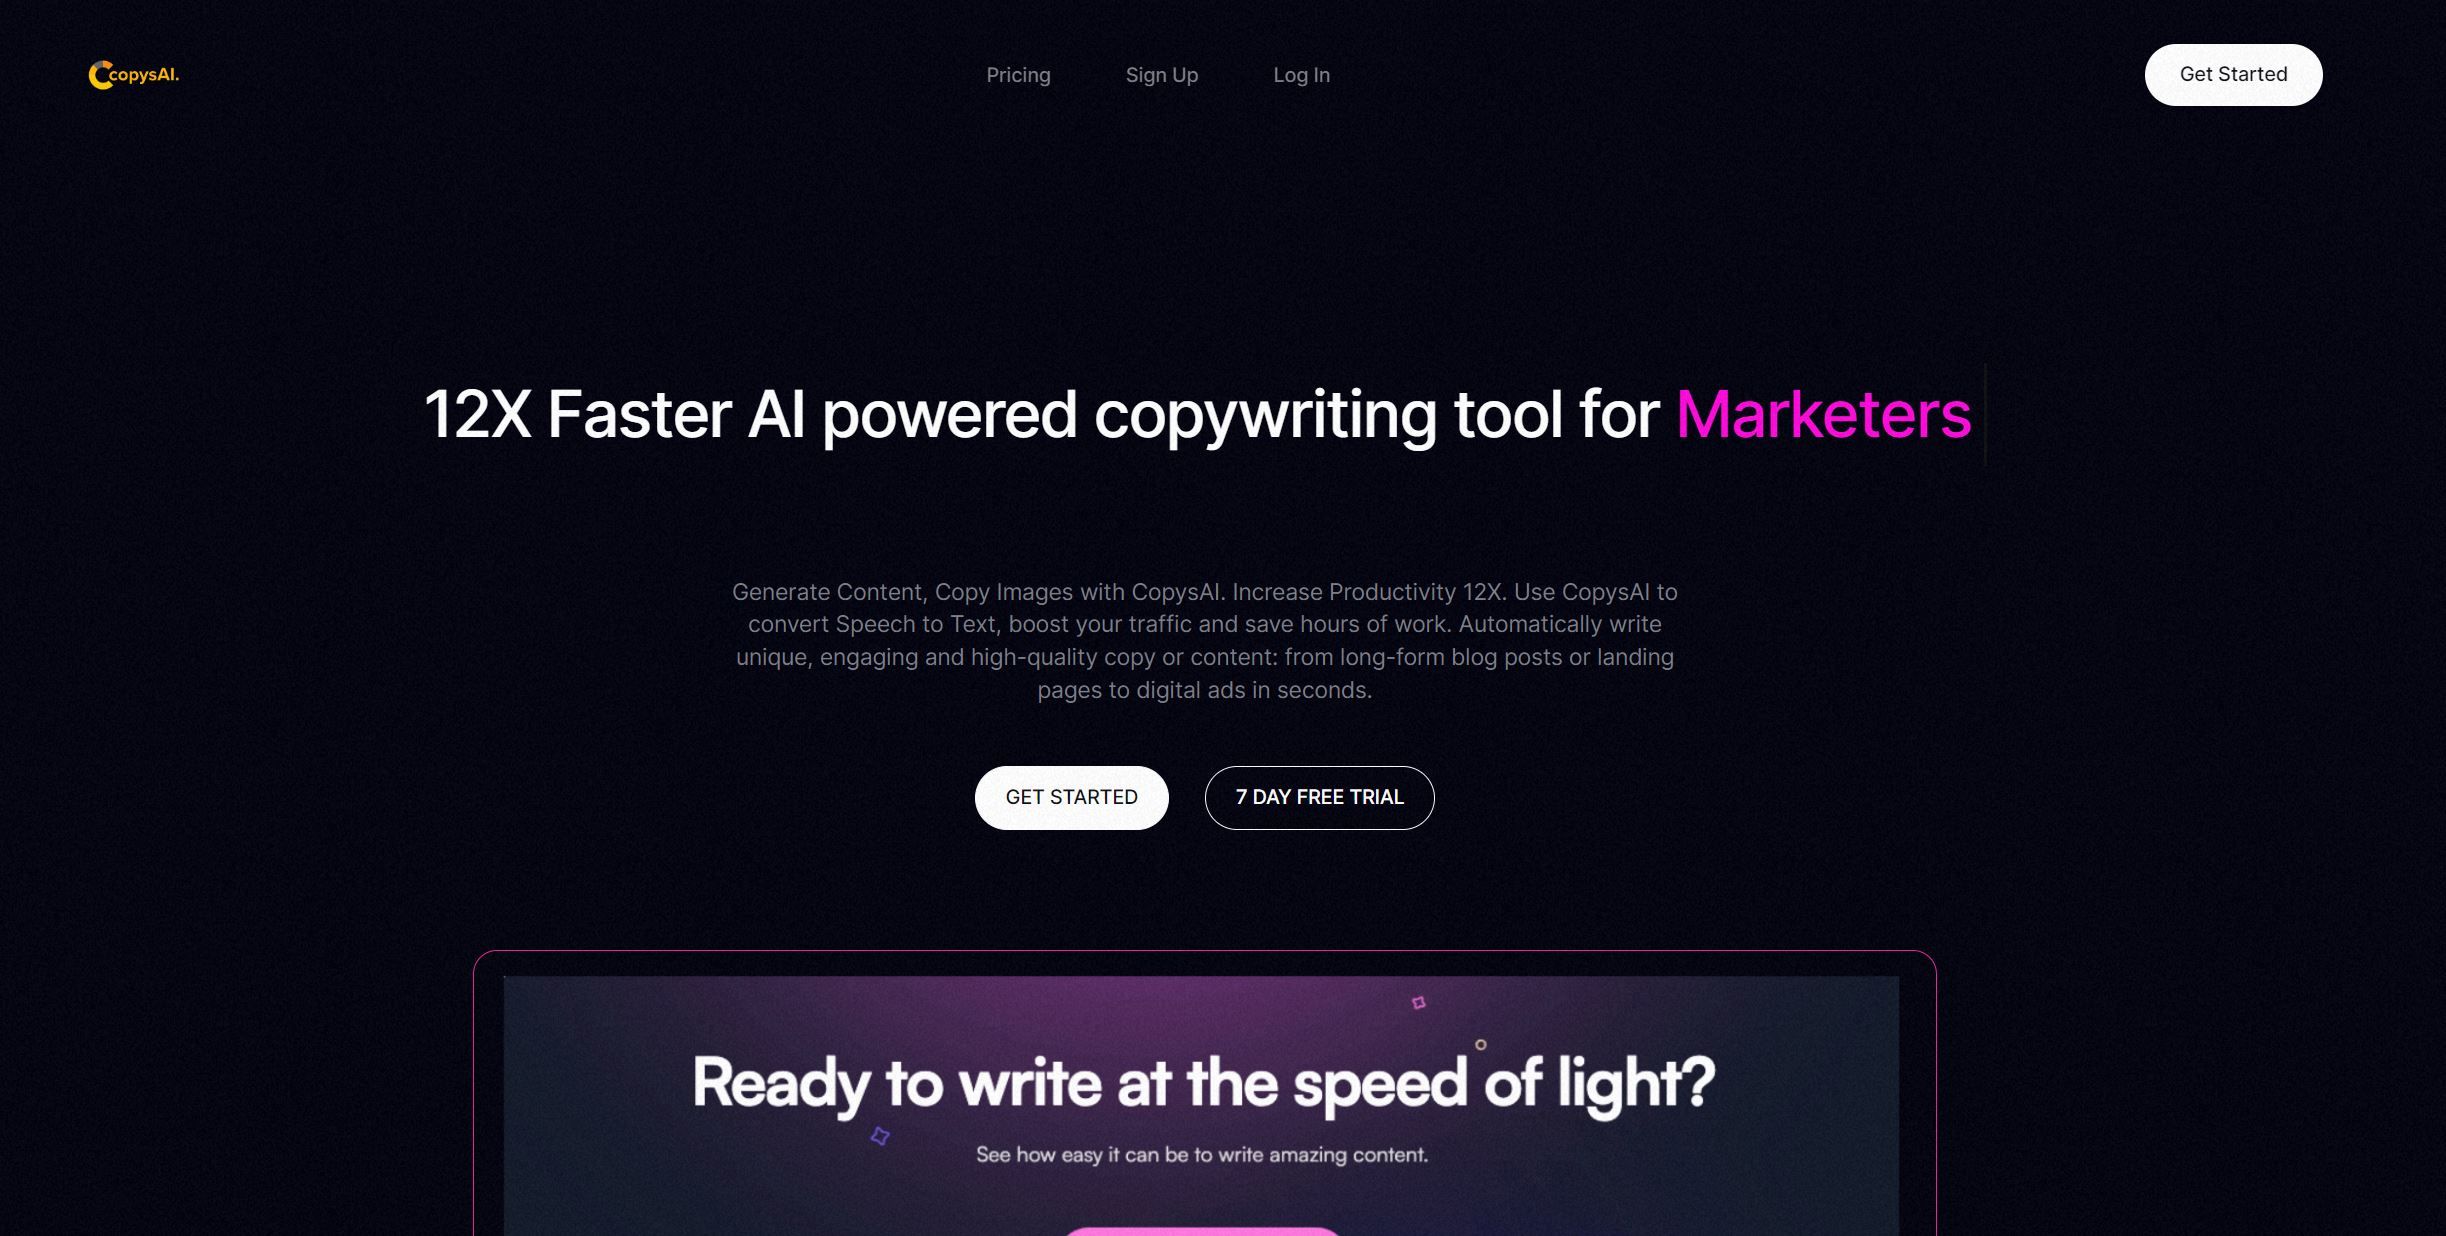  Quickly created content for writers & marketers.